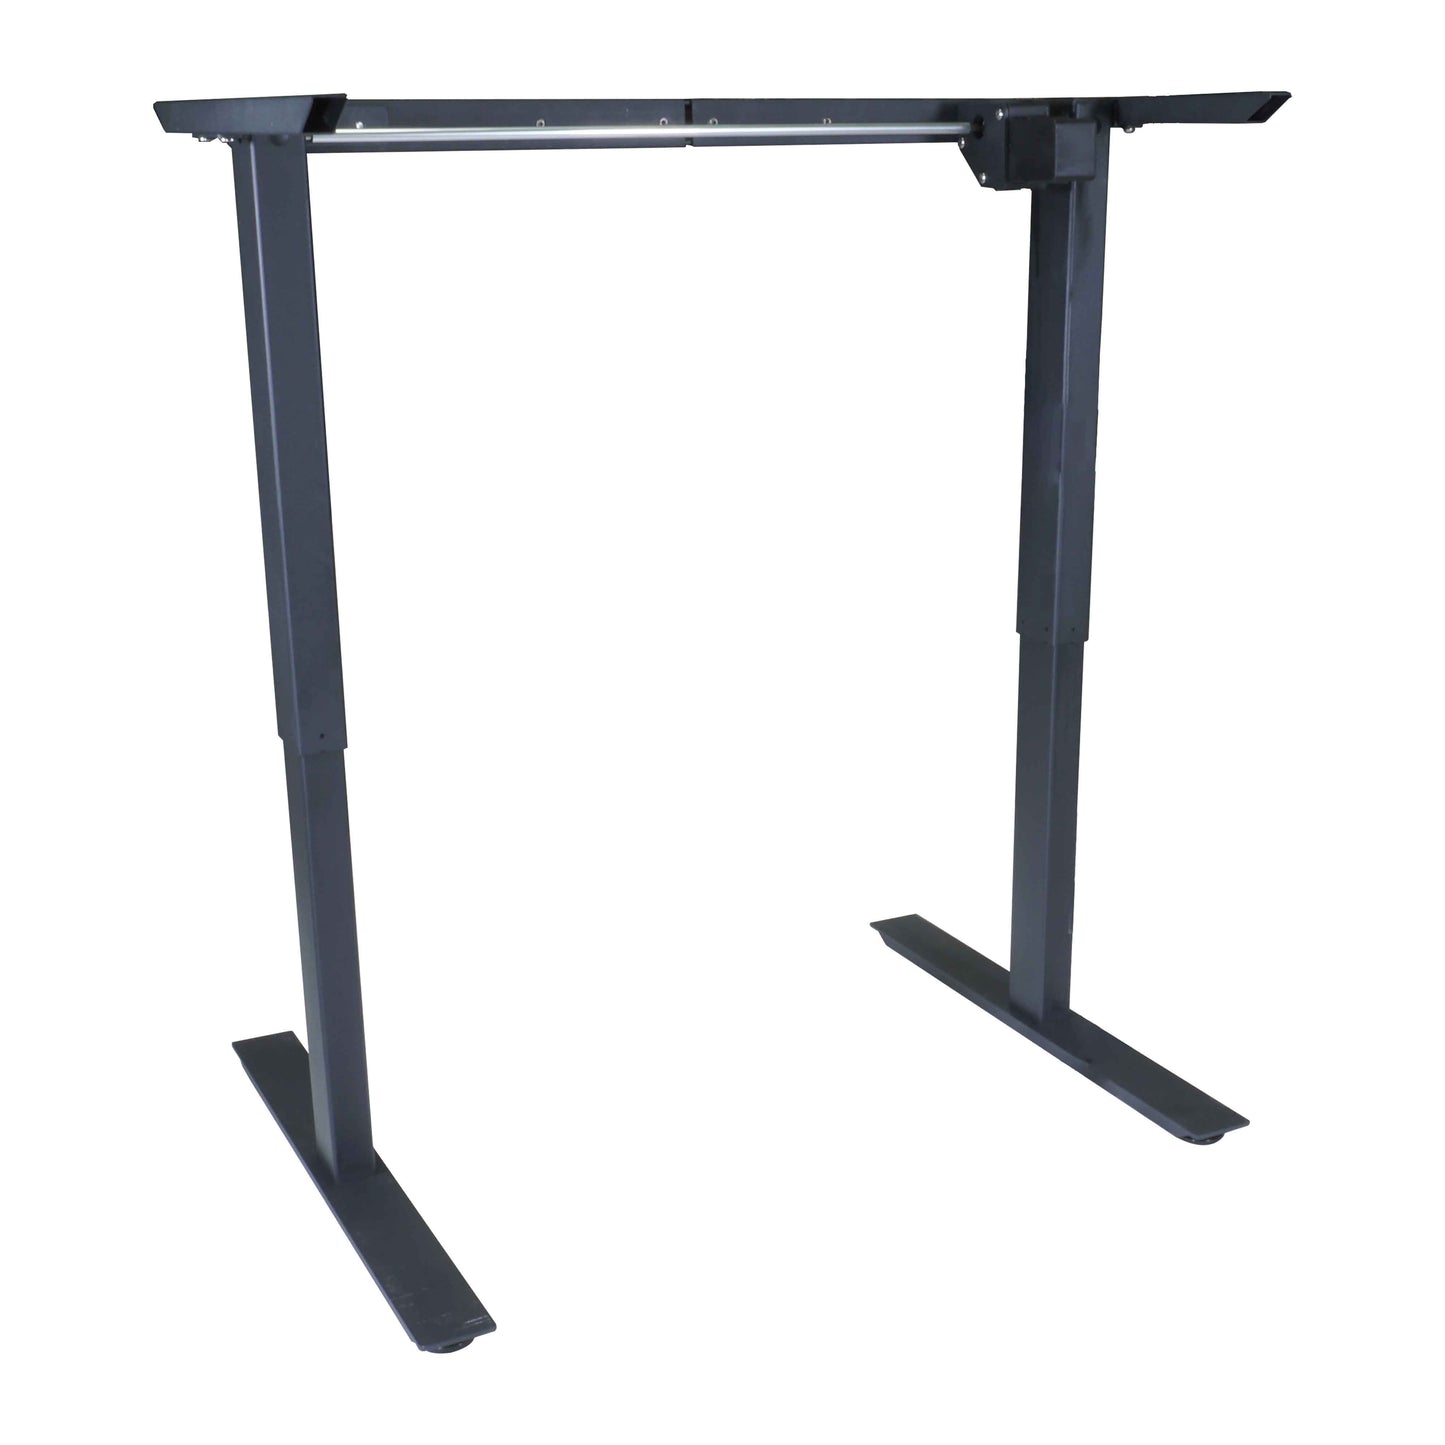 Single Motor Electric Adjustable Height A2 Sit-Stand Desk (Black) - view 4